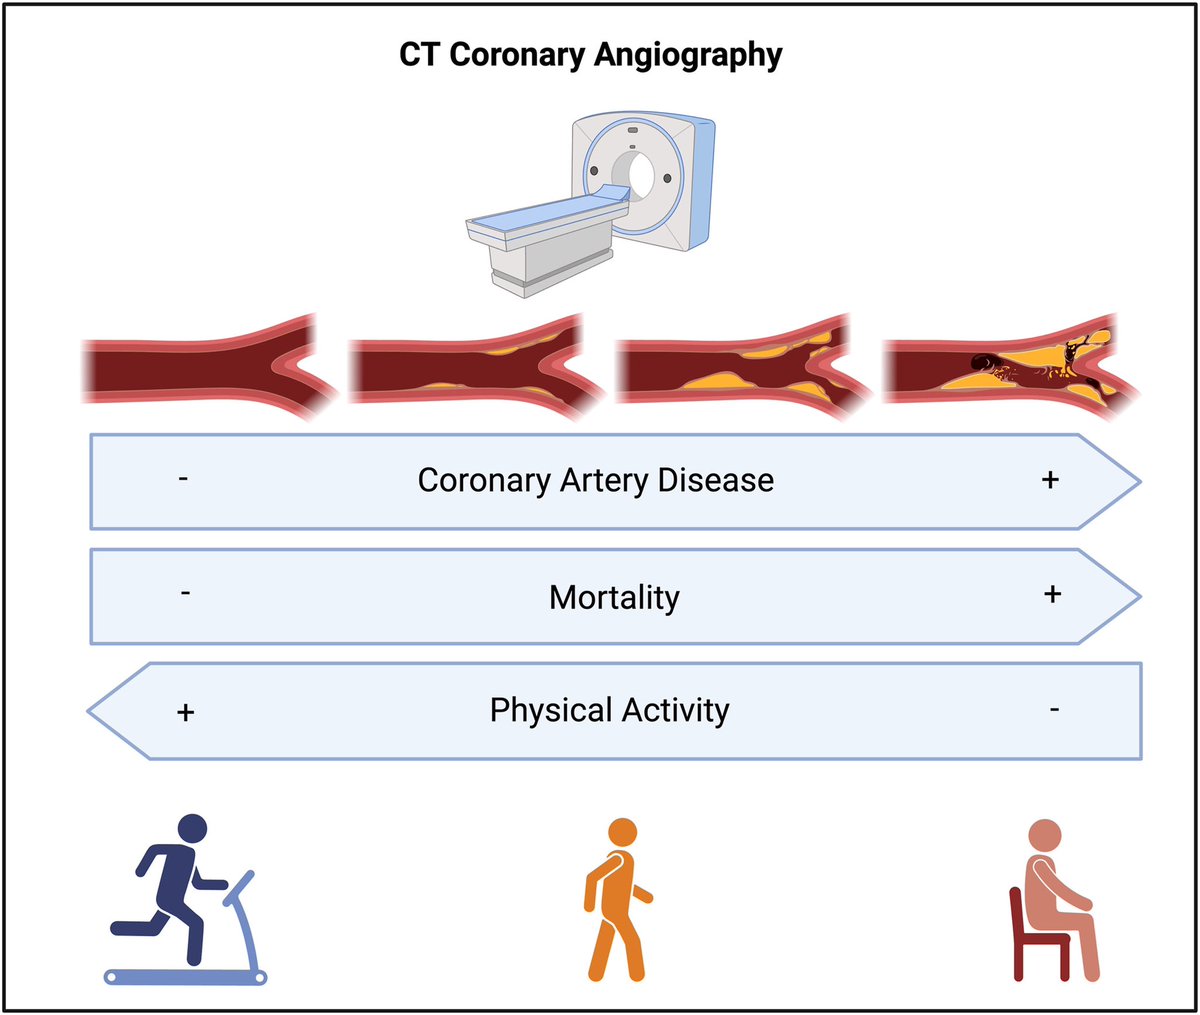 Check our editorial with Chip Lavie and @BudoffMd 👉🏻 Improving the prognostic impact of computed tomography coronary angiography with physical activity, exercise and fitness based on the great paper by @NatanzonSharon @robertjhmiller @Piotr_JSlomka @damini_dey @danielbermanmd